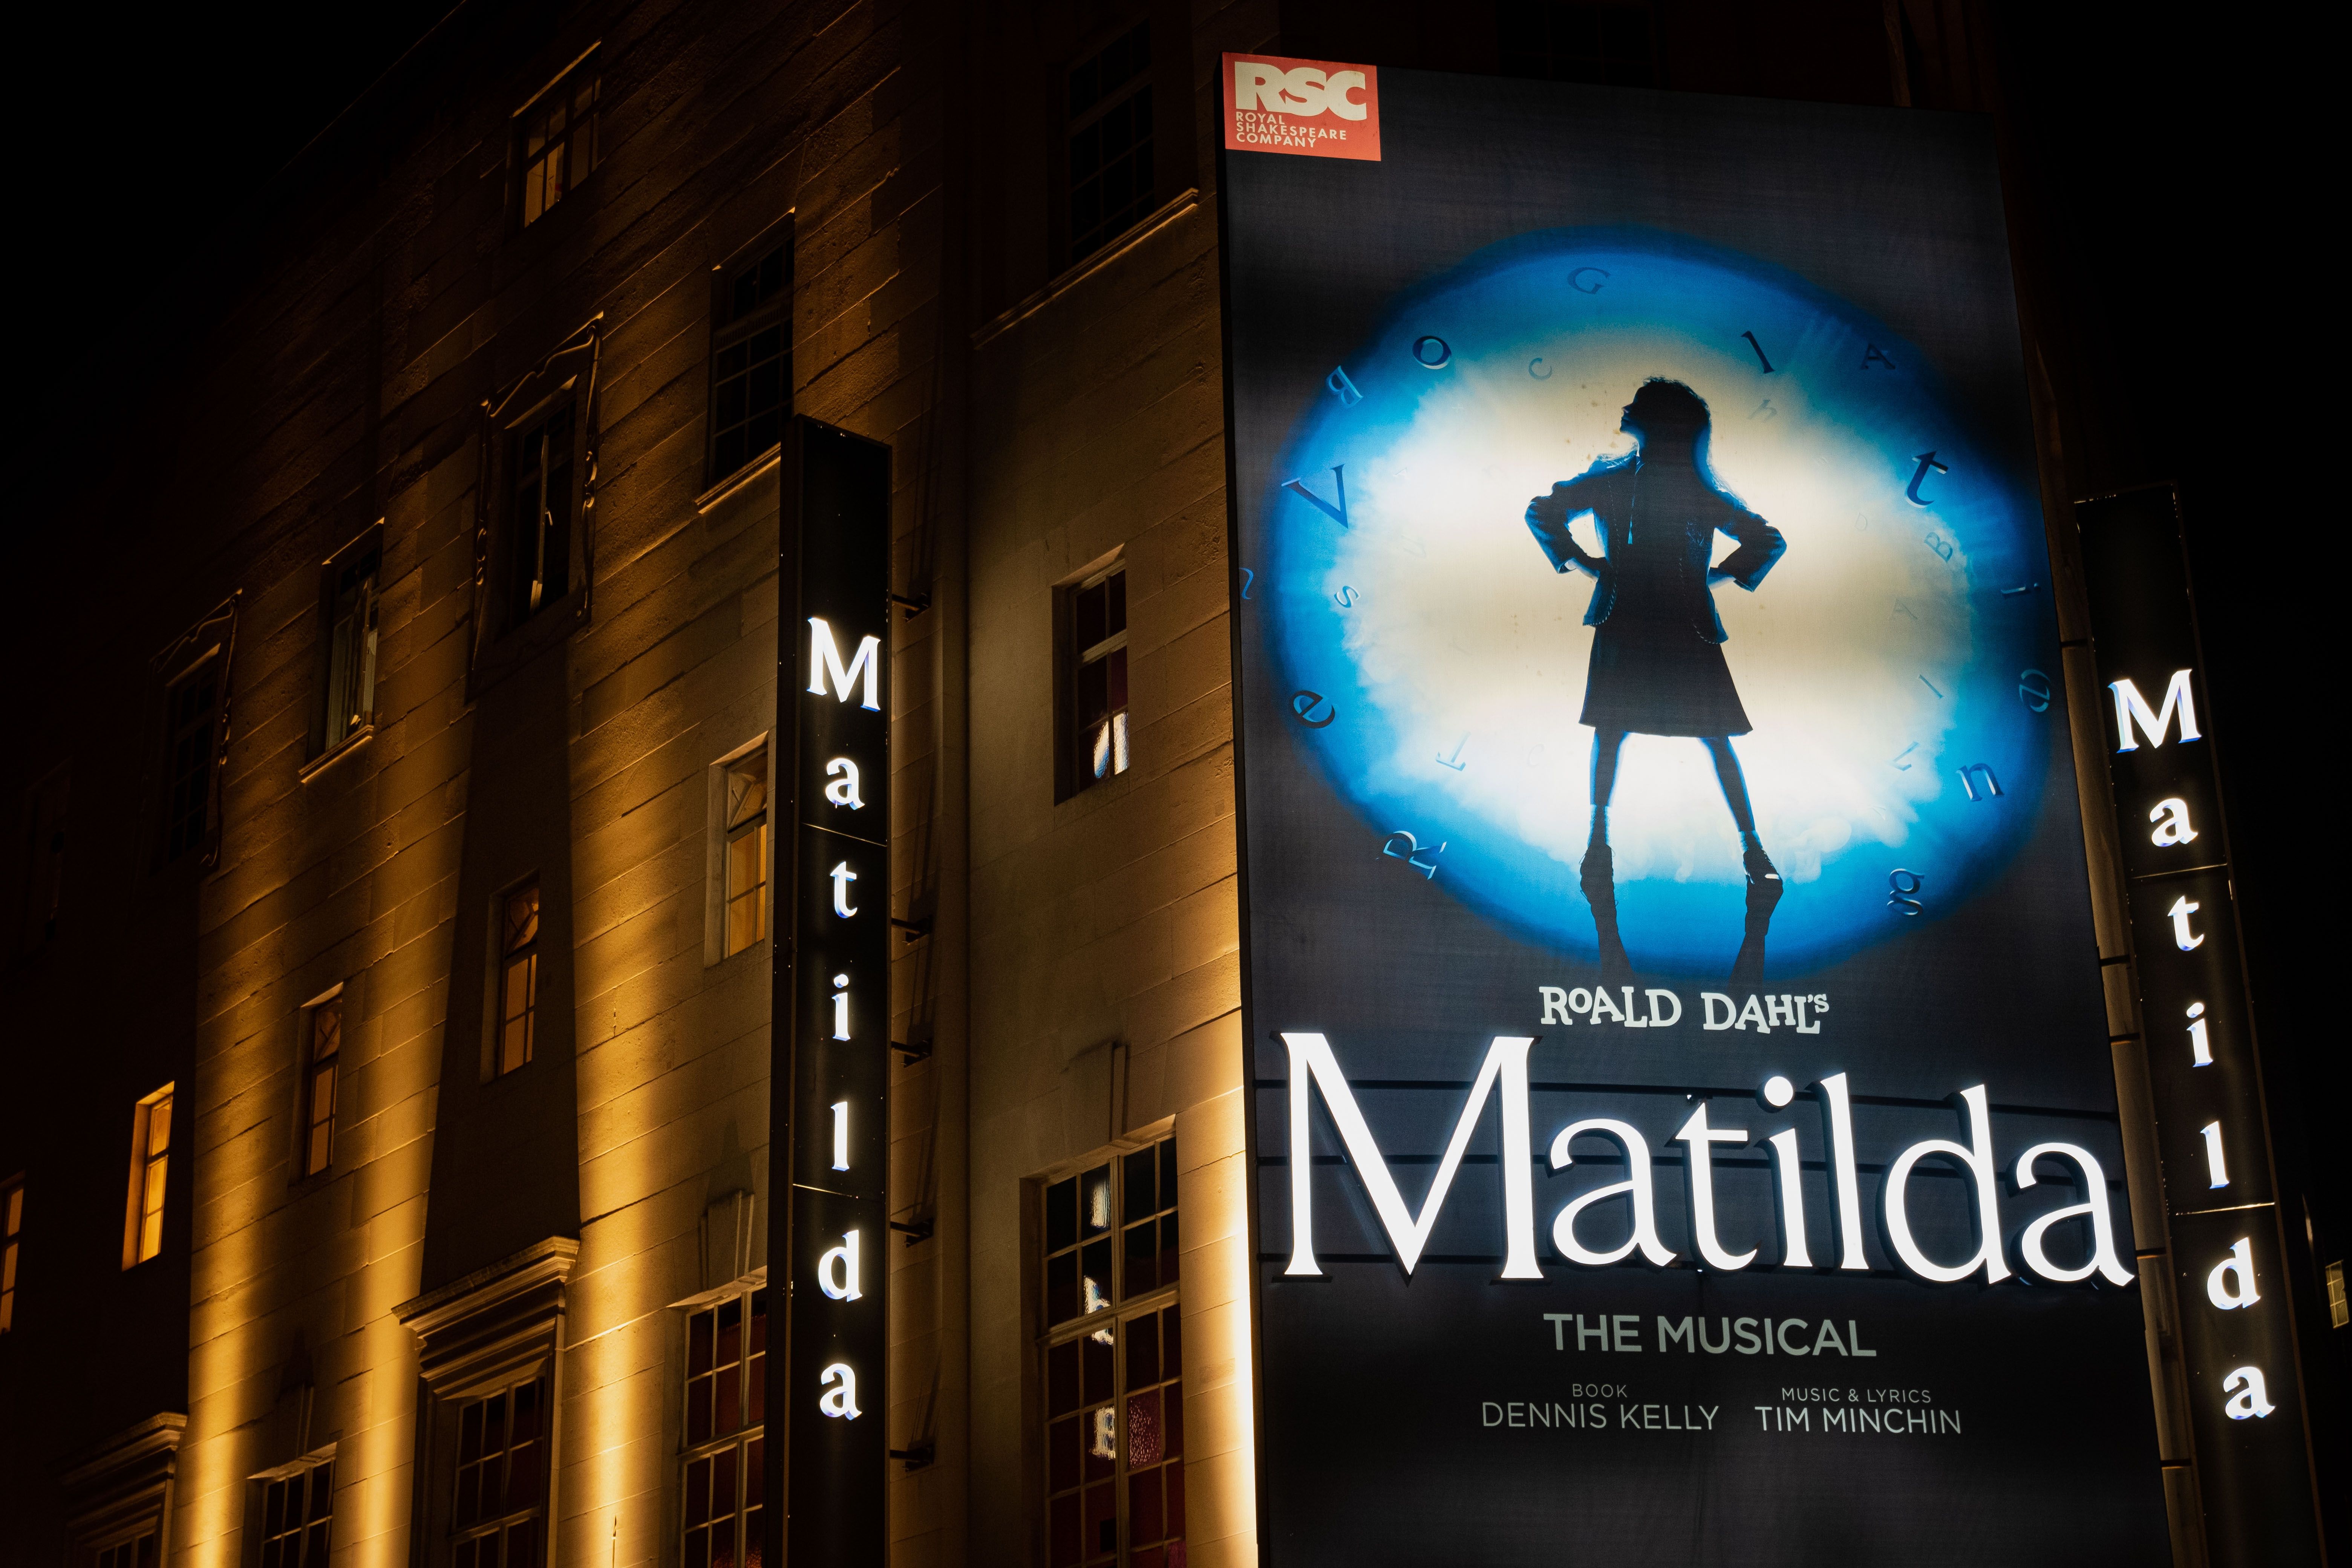 All references to ‘female’ have been removed from texts such as Matilda